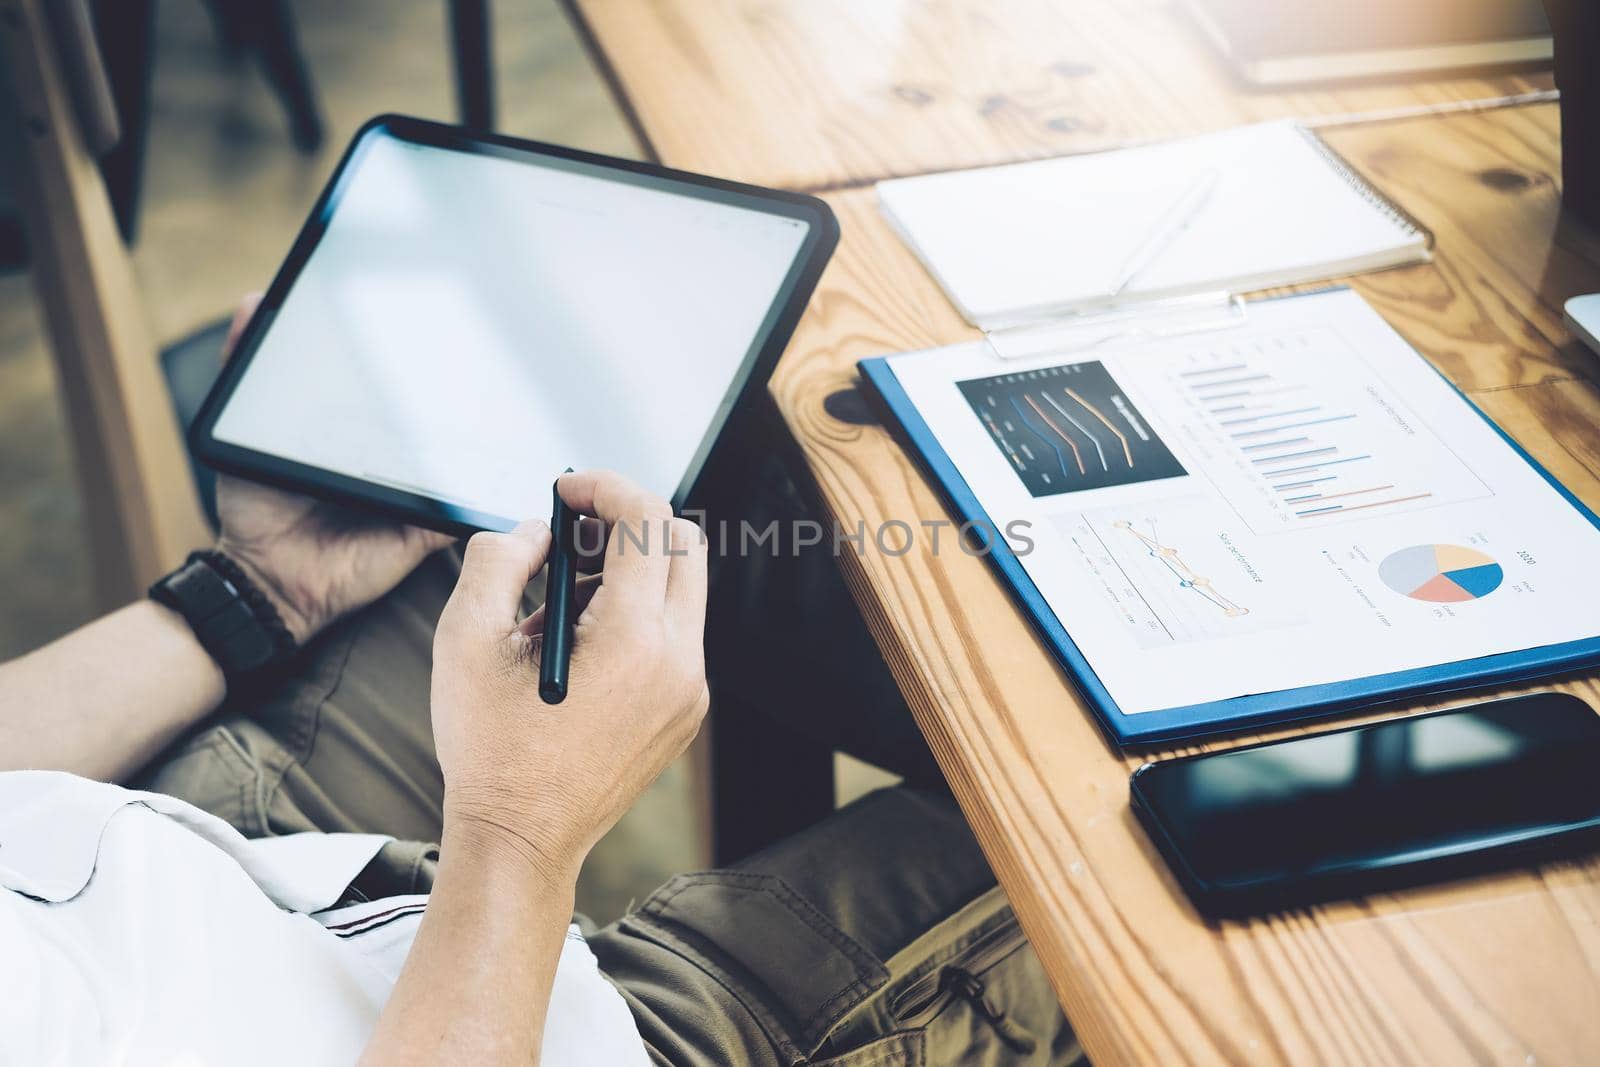 Financial Freedom, a stock analyst holding a pen pointing at a tablet Analyze the stock market to make a profit for your own portfolio